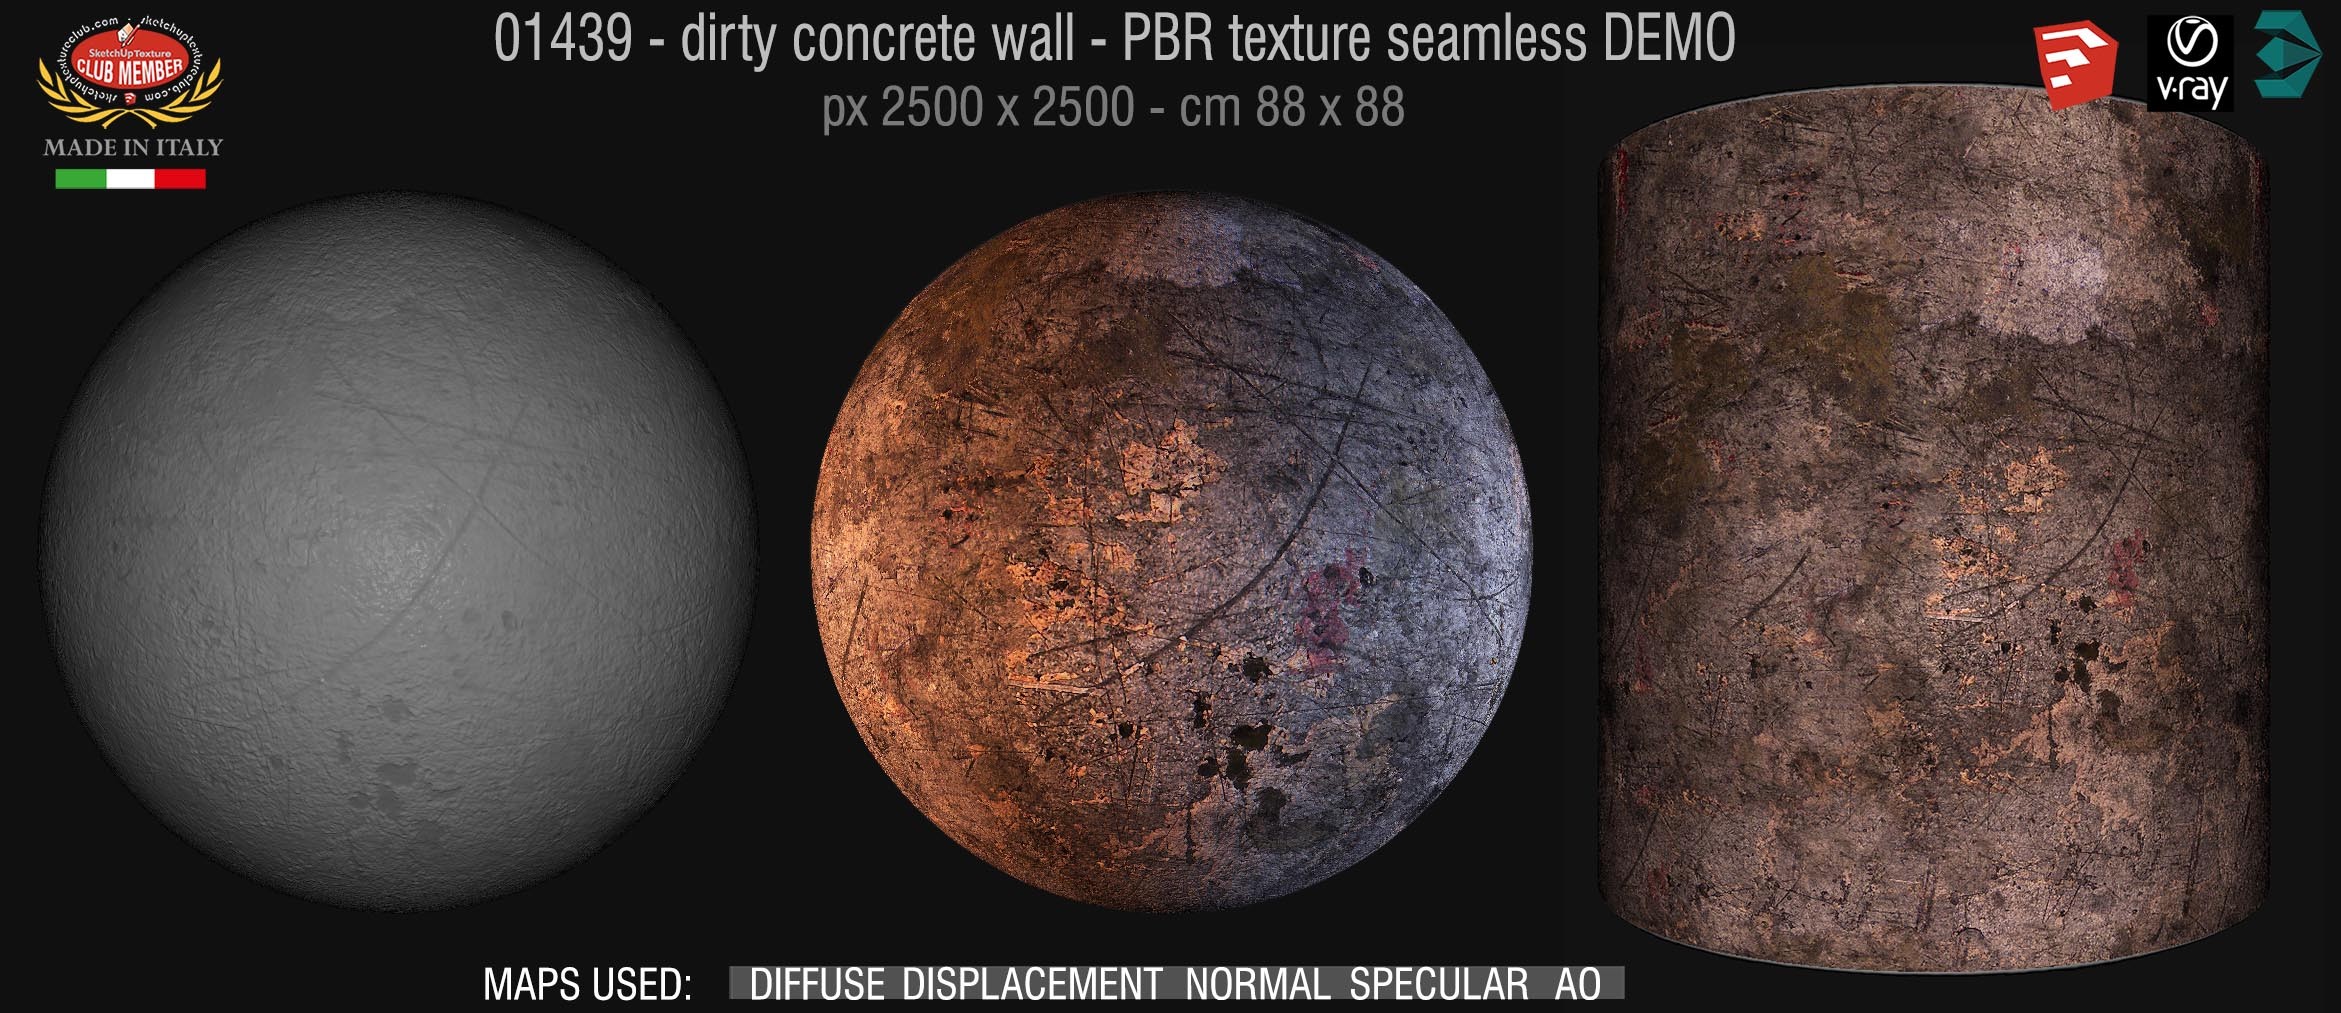 01439 Concrete bare dirty wall PBR texture seamless DEMO